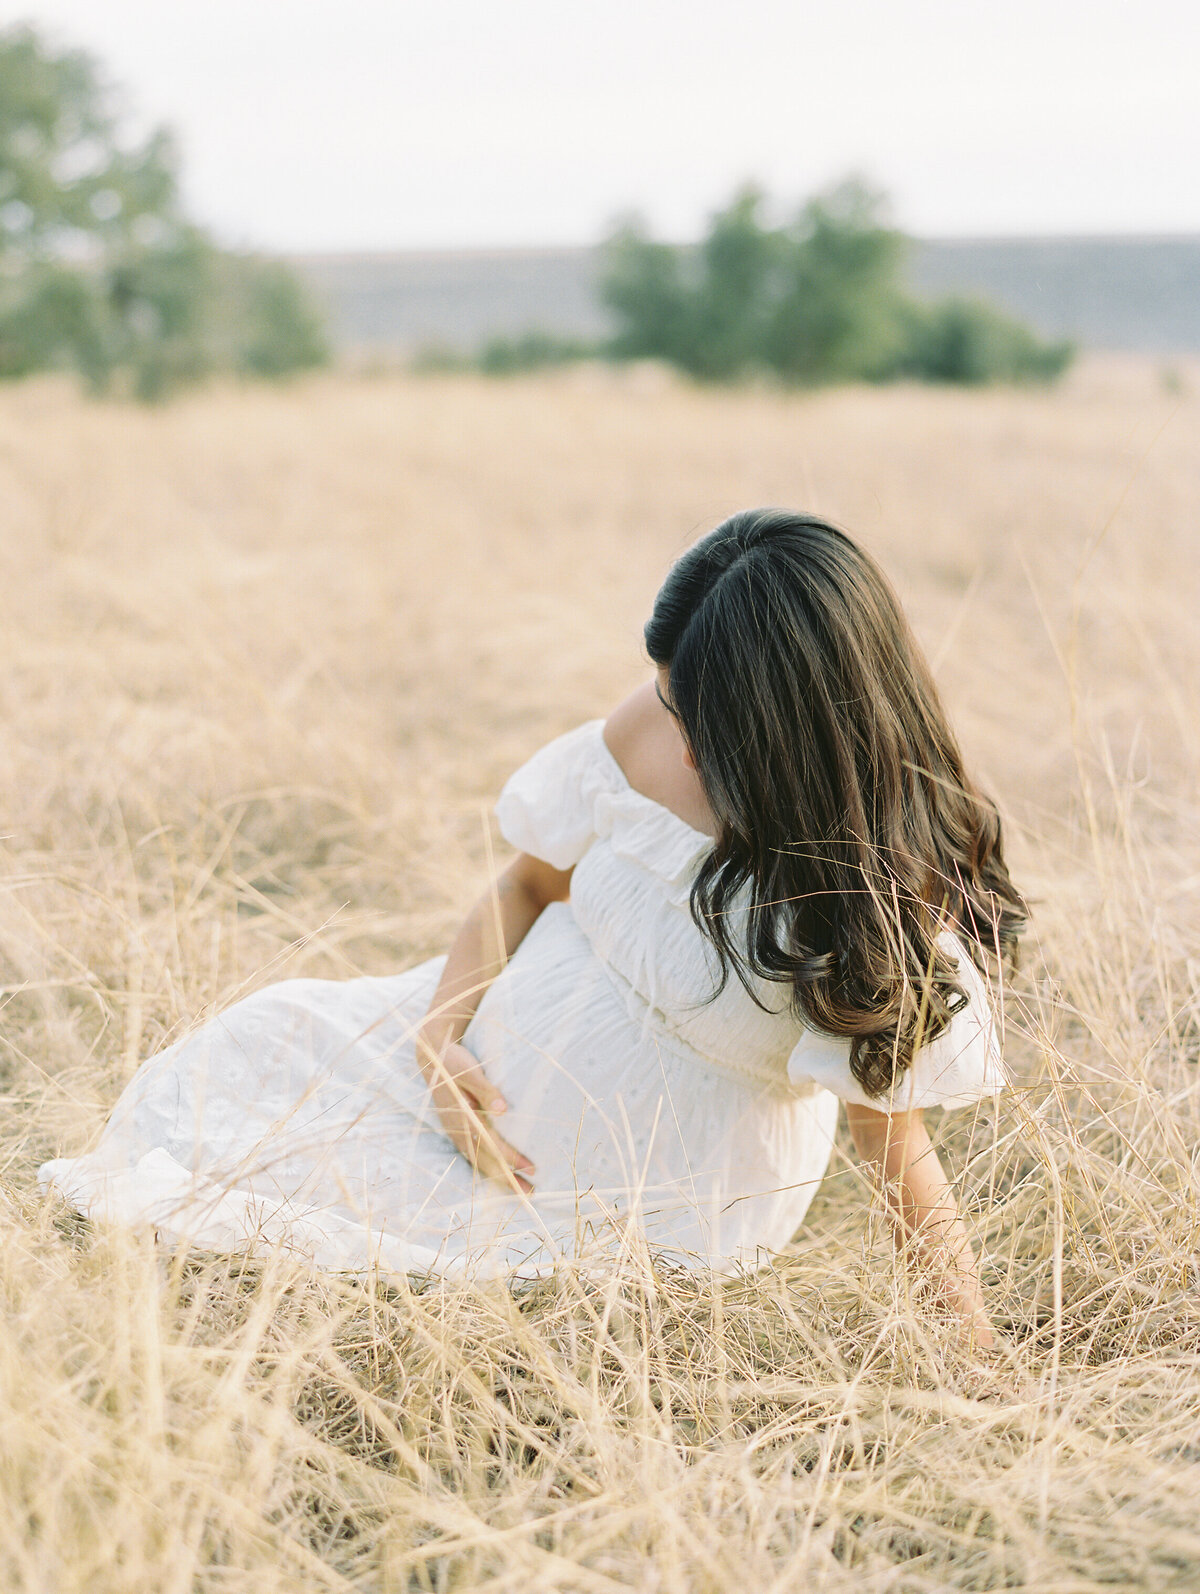 Pregnant woman in a long white dress sitting in a grassy field